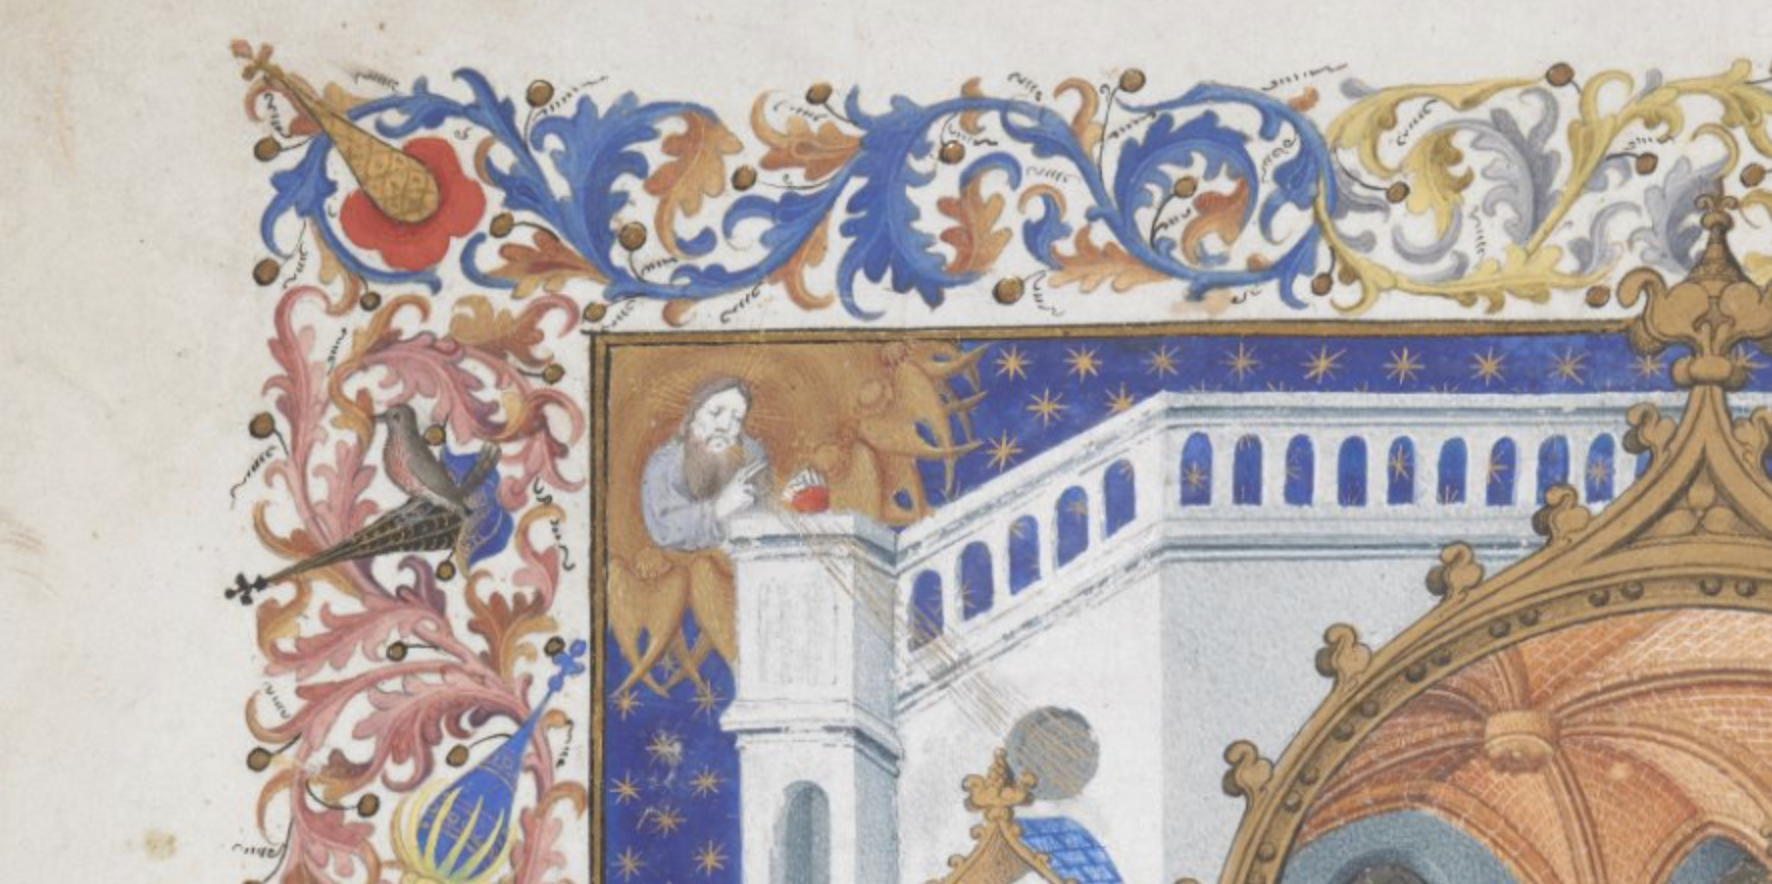 portion of a page in the Egerton 1070 manuscript featuring acanthus leaves and God looking down from heaven.